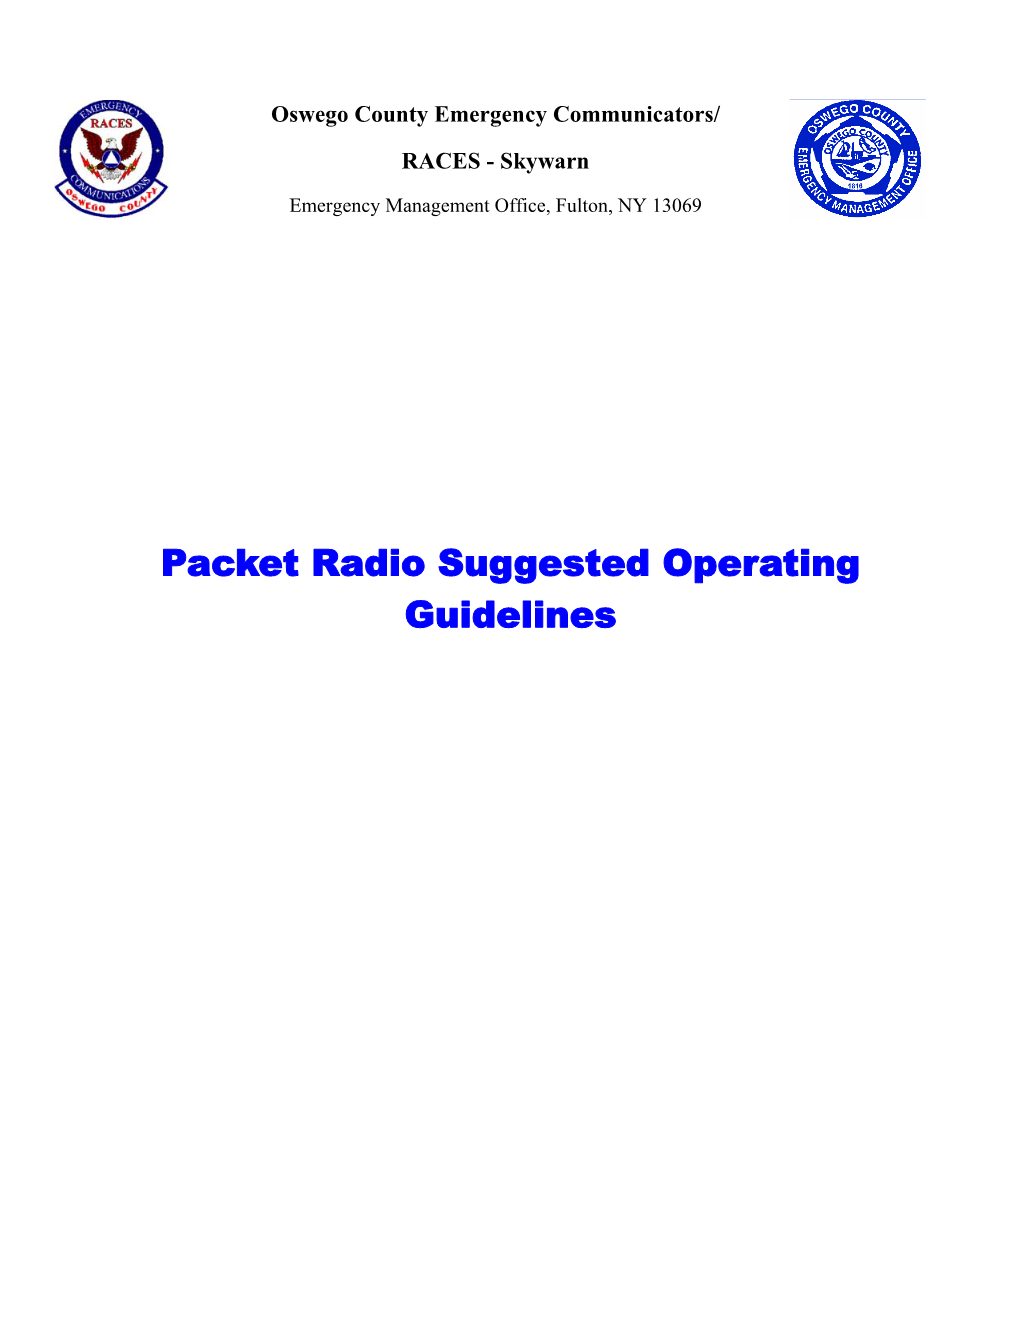 Packet Radio Suggested Operating Guidelines